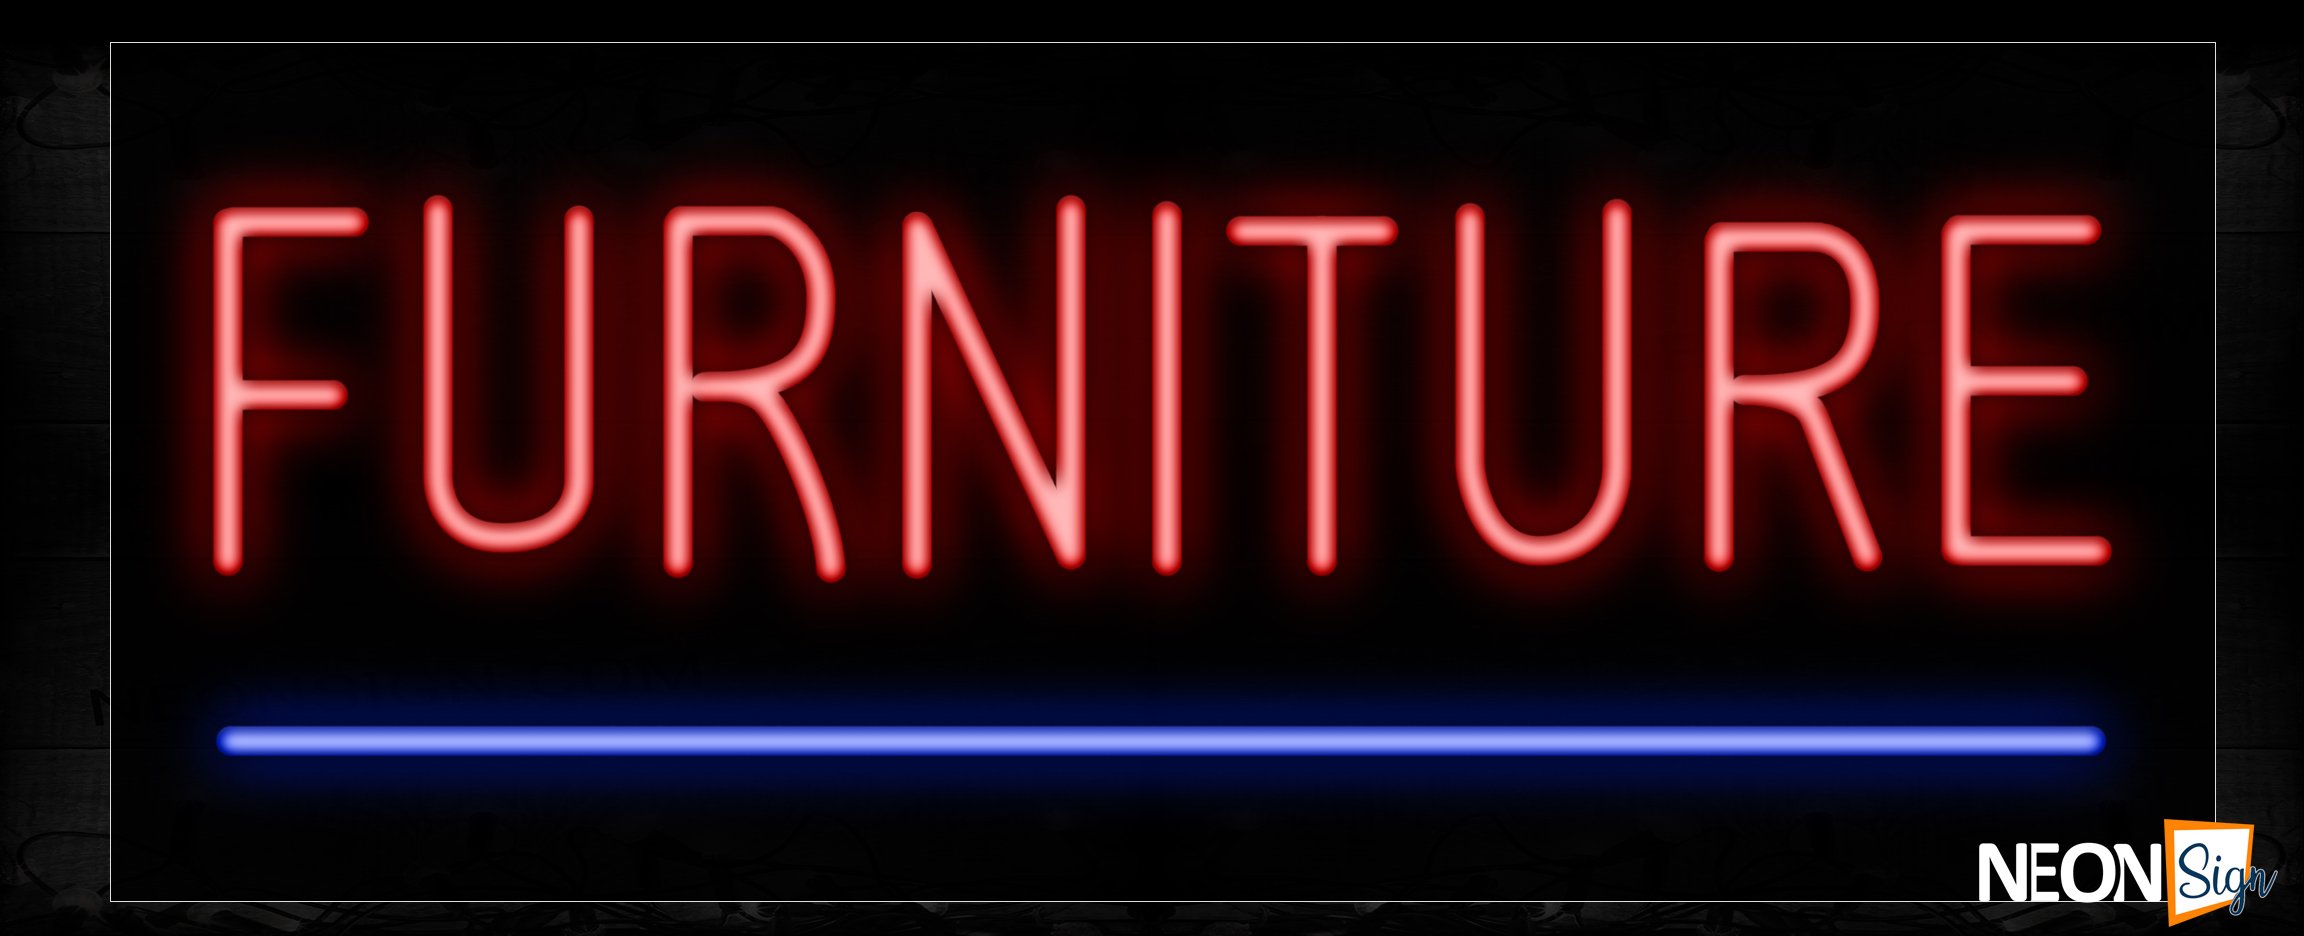 Image of 10712 Furniture in red with blue line Neon Sign_13x32 Black Backing